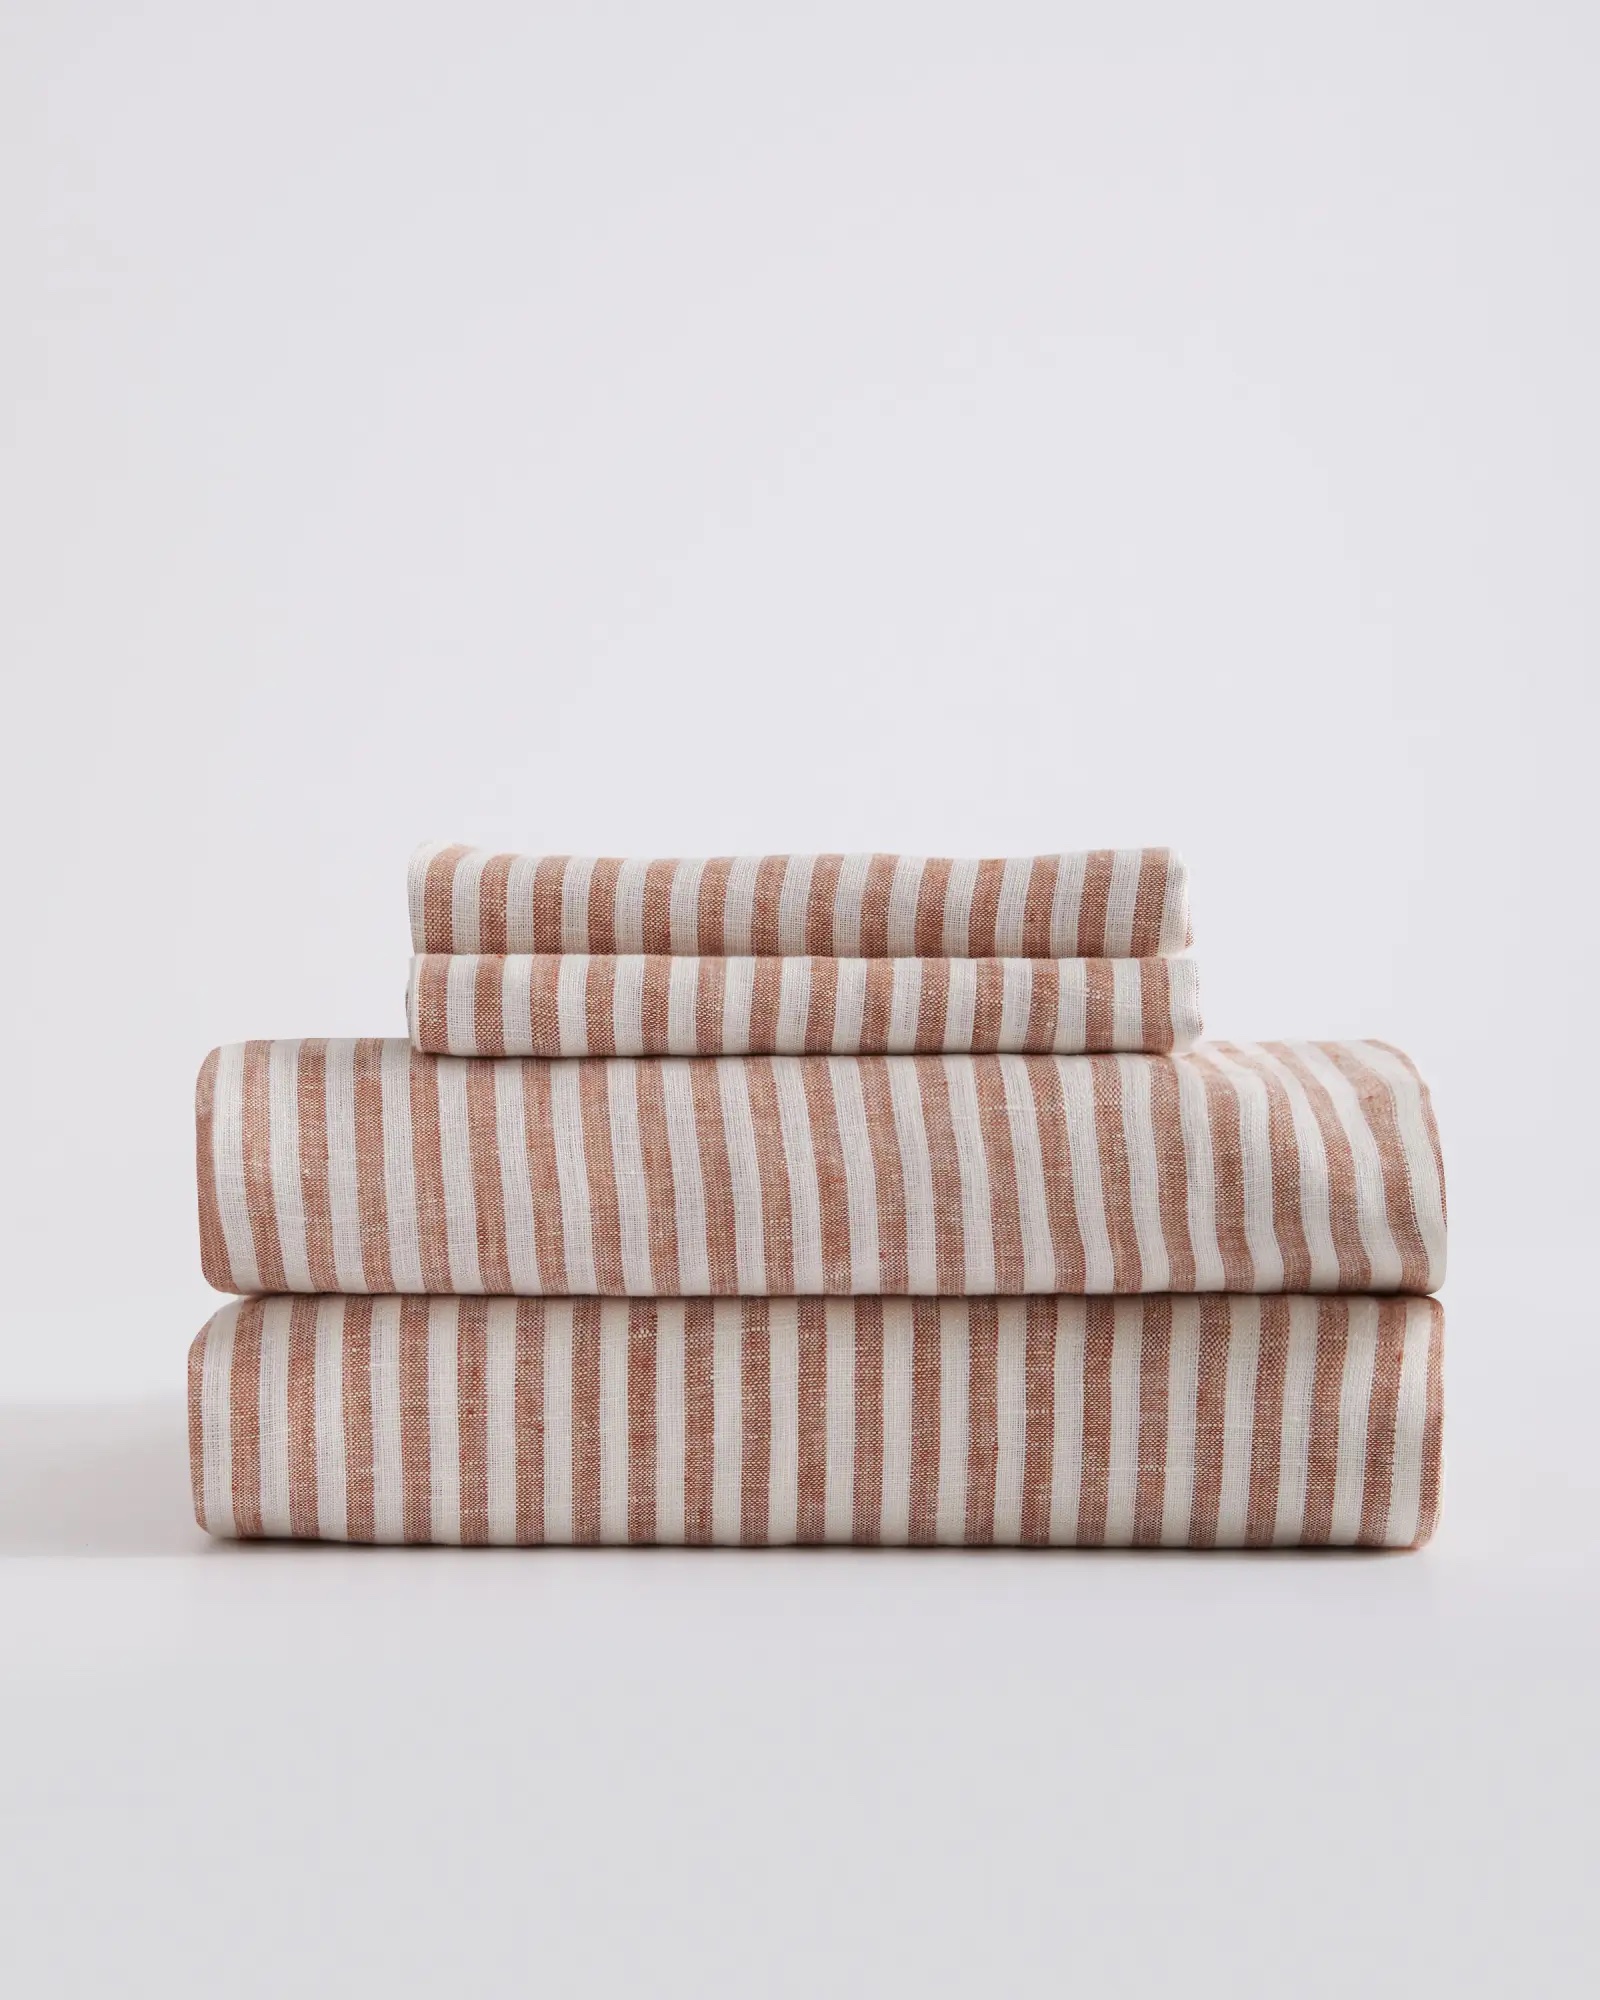 White and red striped linen sheets folded in a stack.